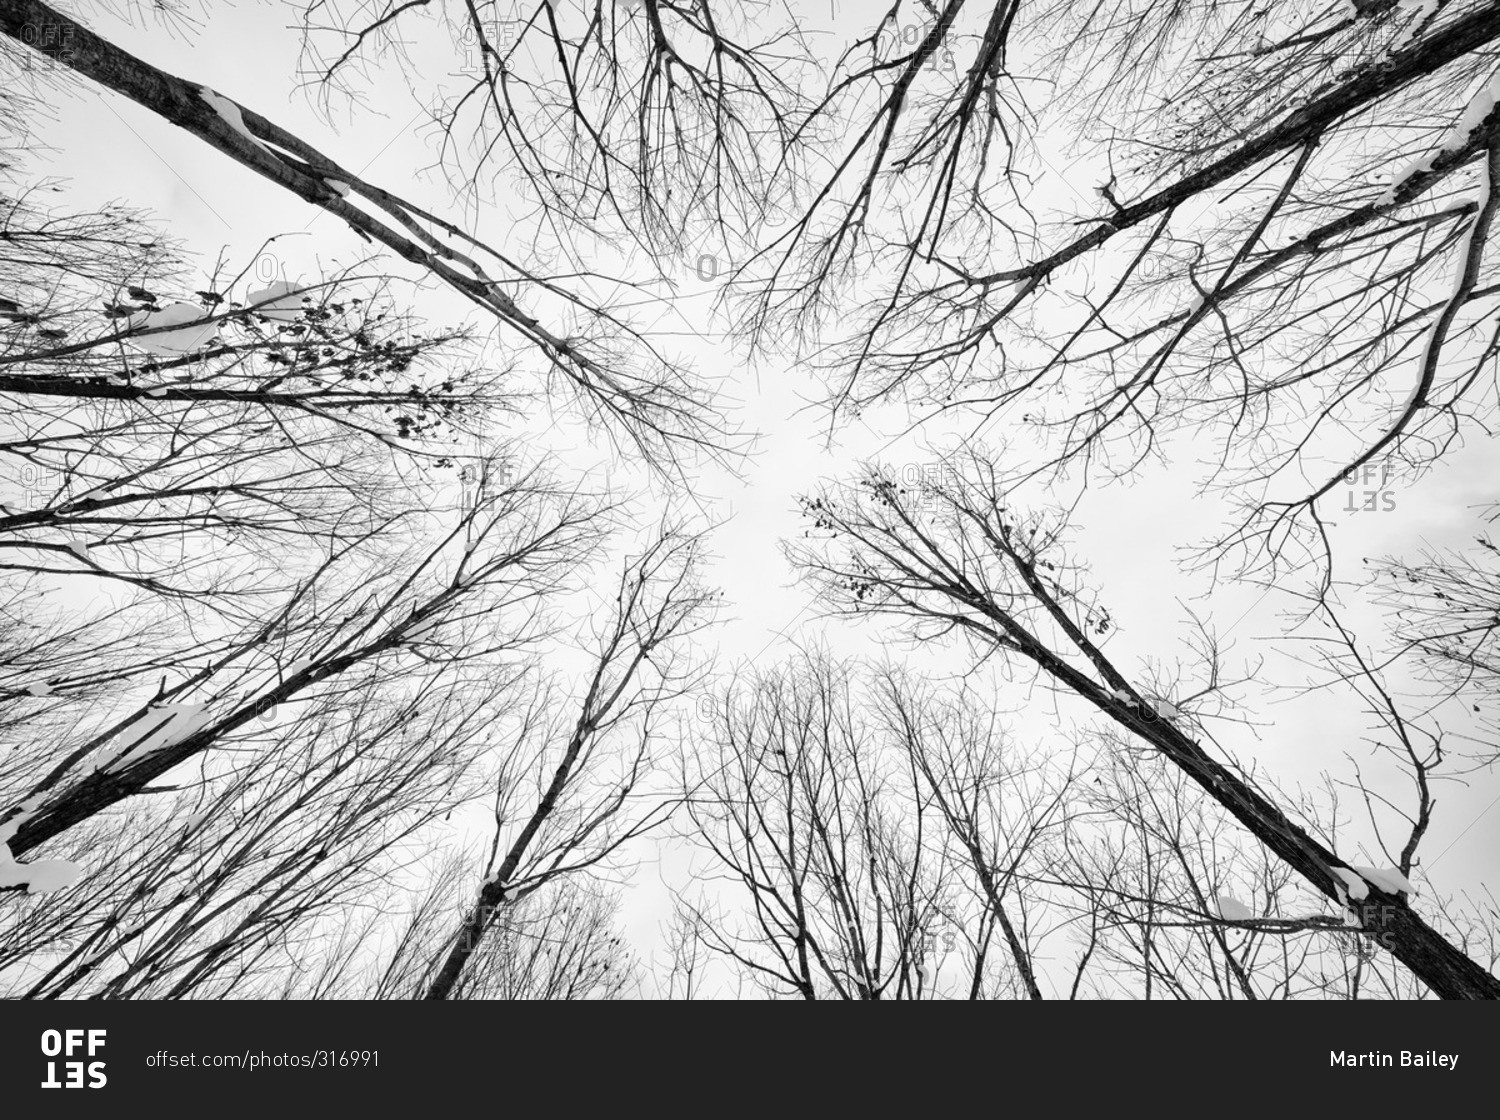 Worm's eye view of a stand of bare trees in rural Japan